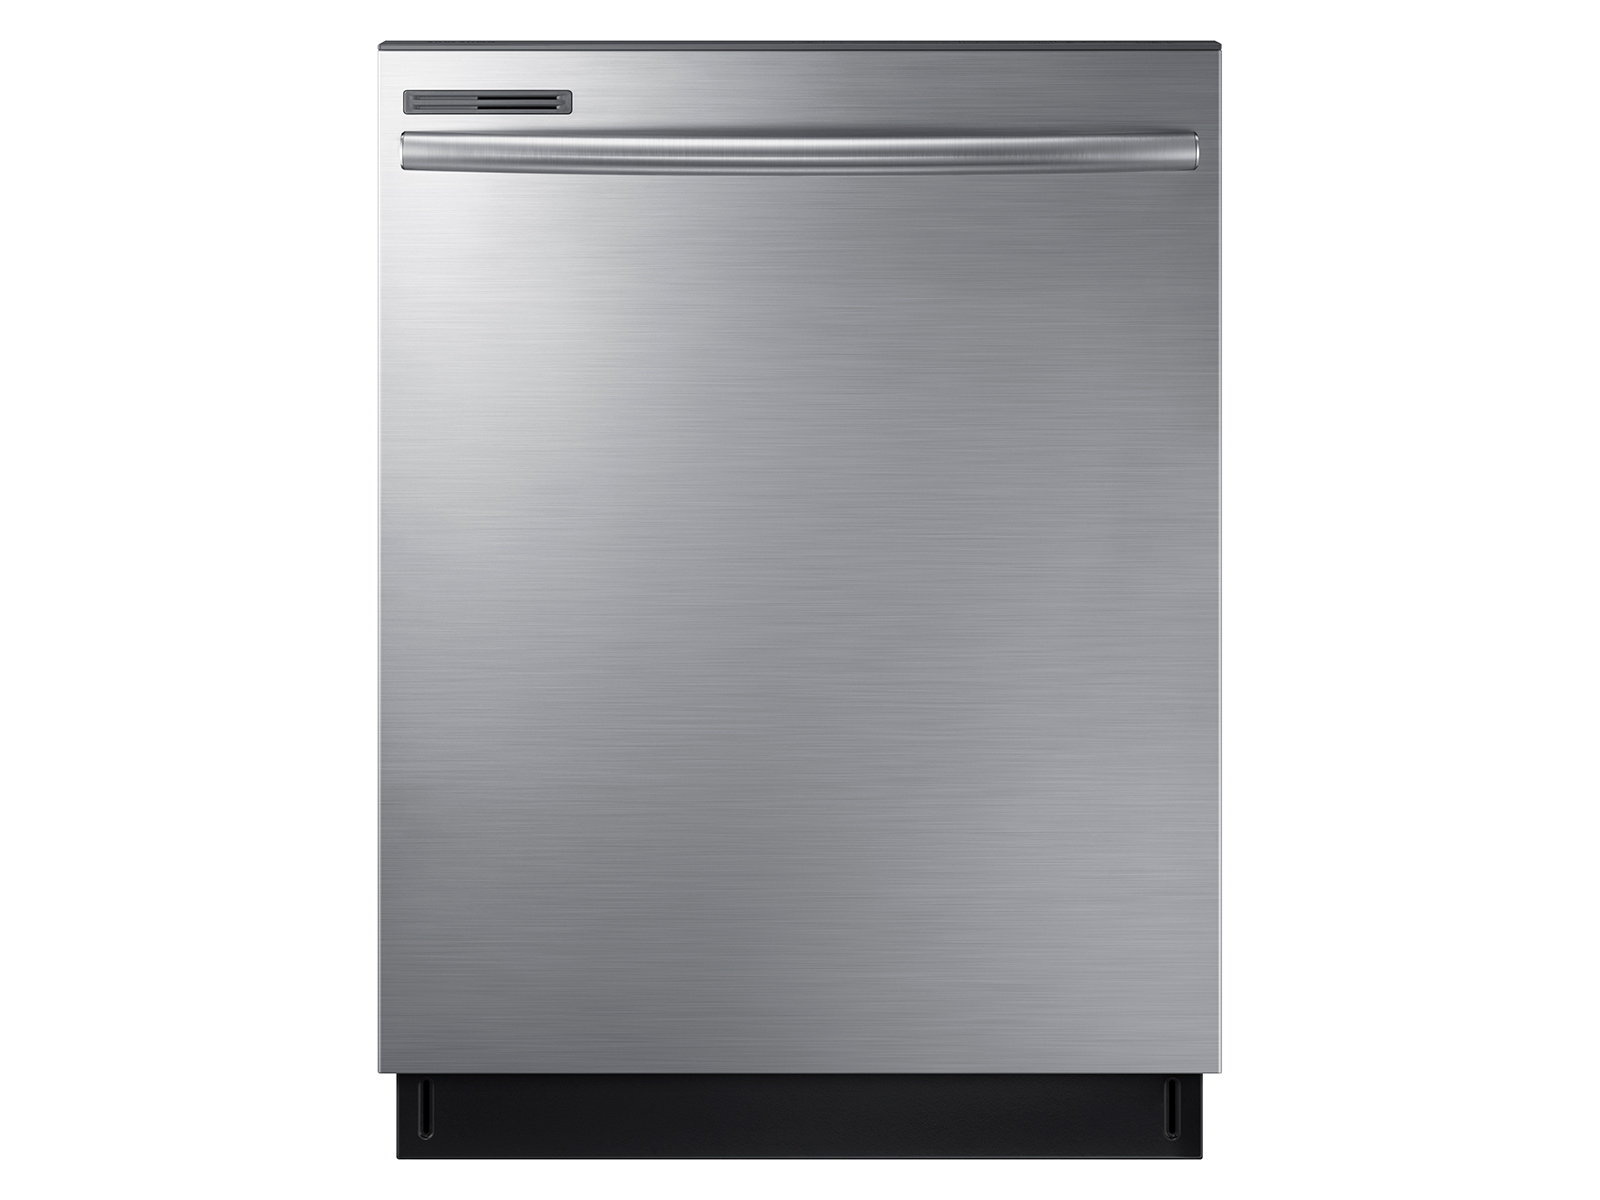 DW80M2020US by Samsung - Top Control Dishwasher with Stainless Steel Door